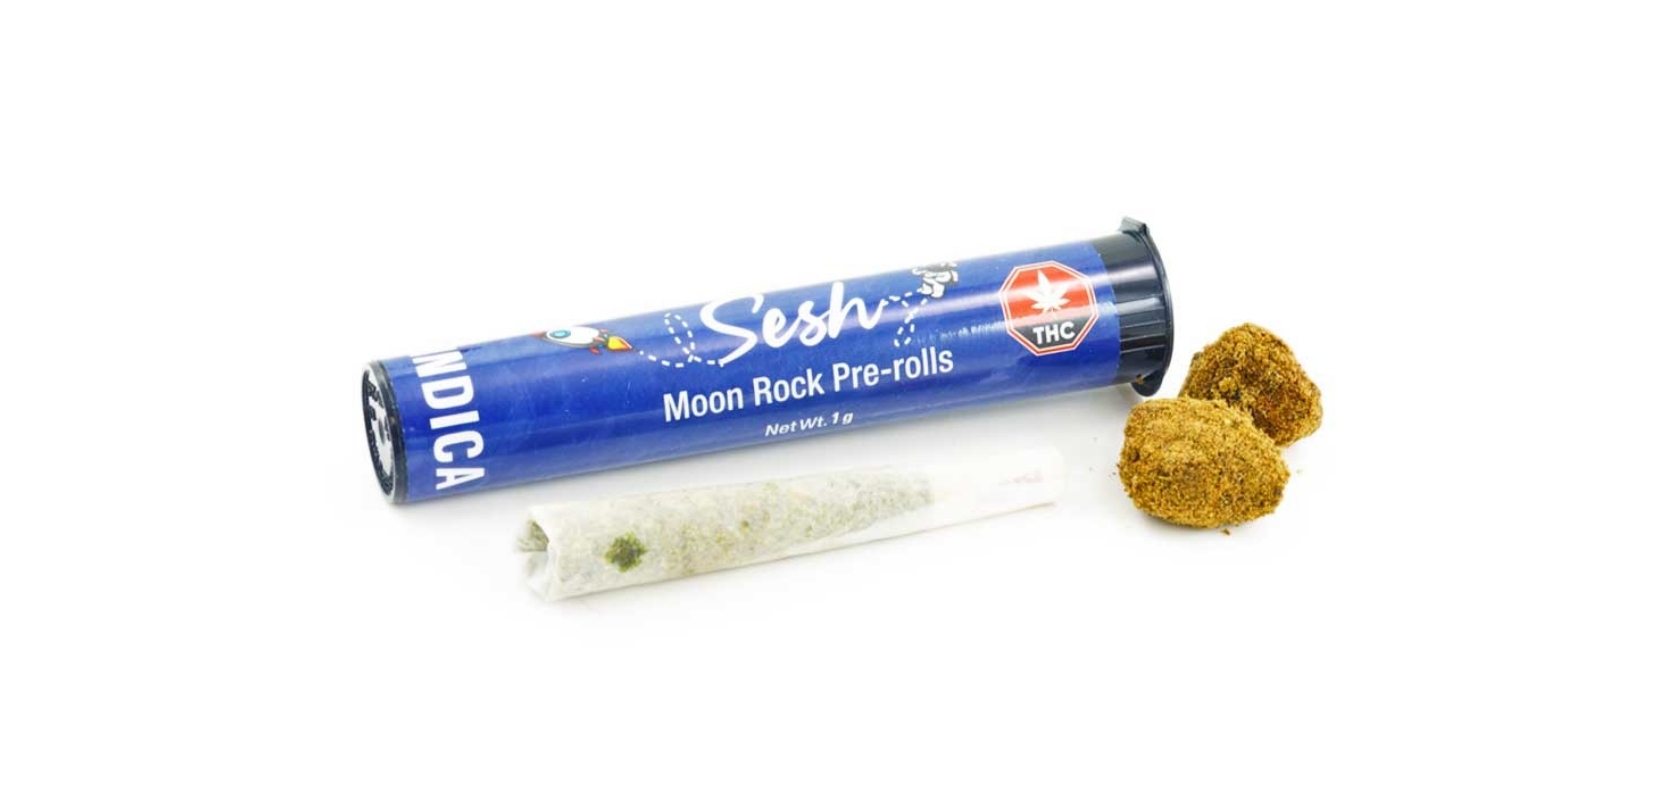 With a choice between Indica and Sativa Sesh Moon Rock Joints, you are at liberty to choose your state of bliss.